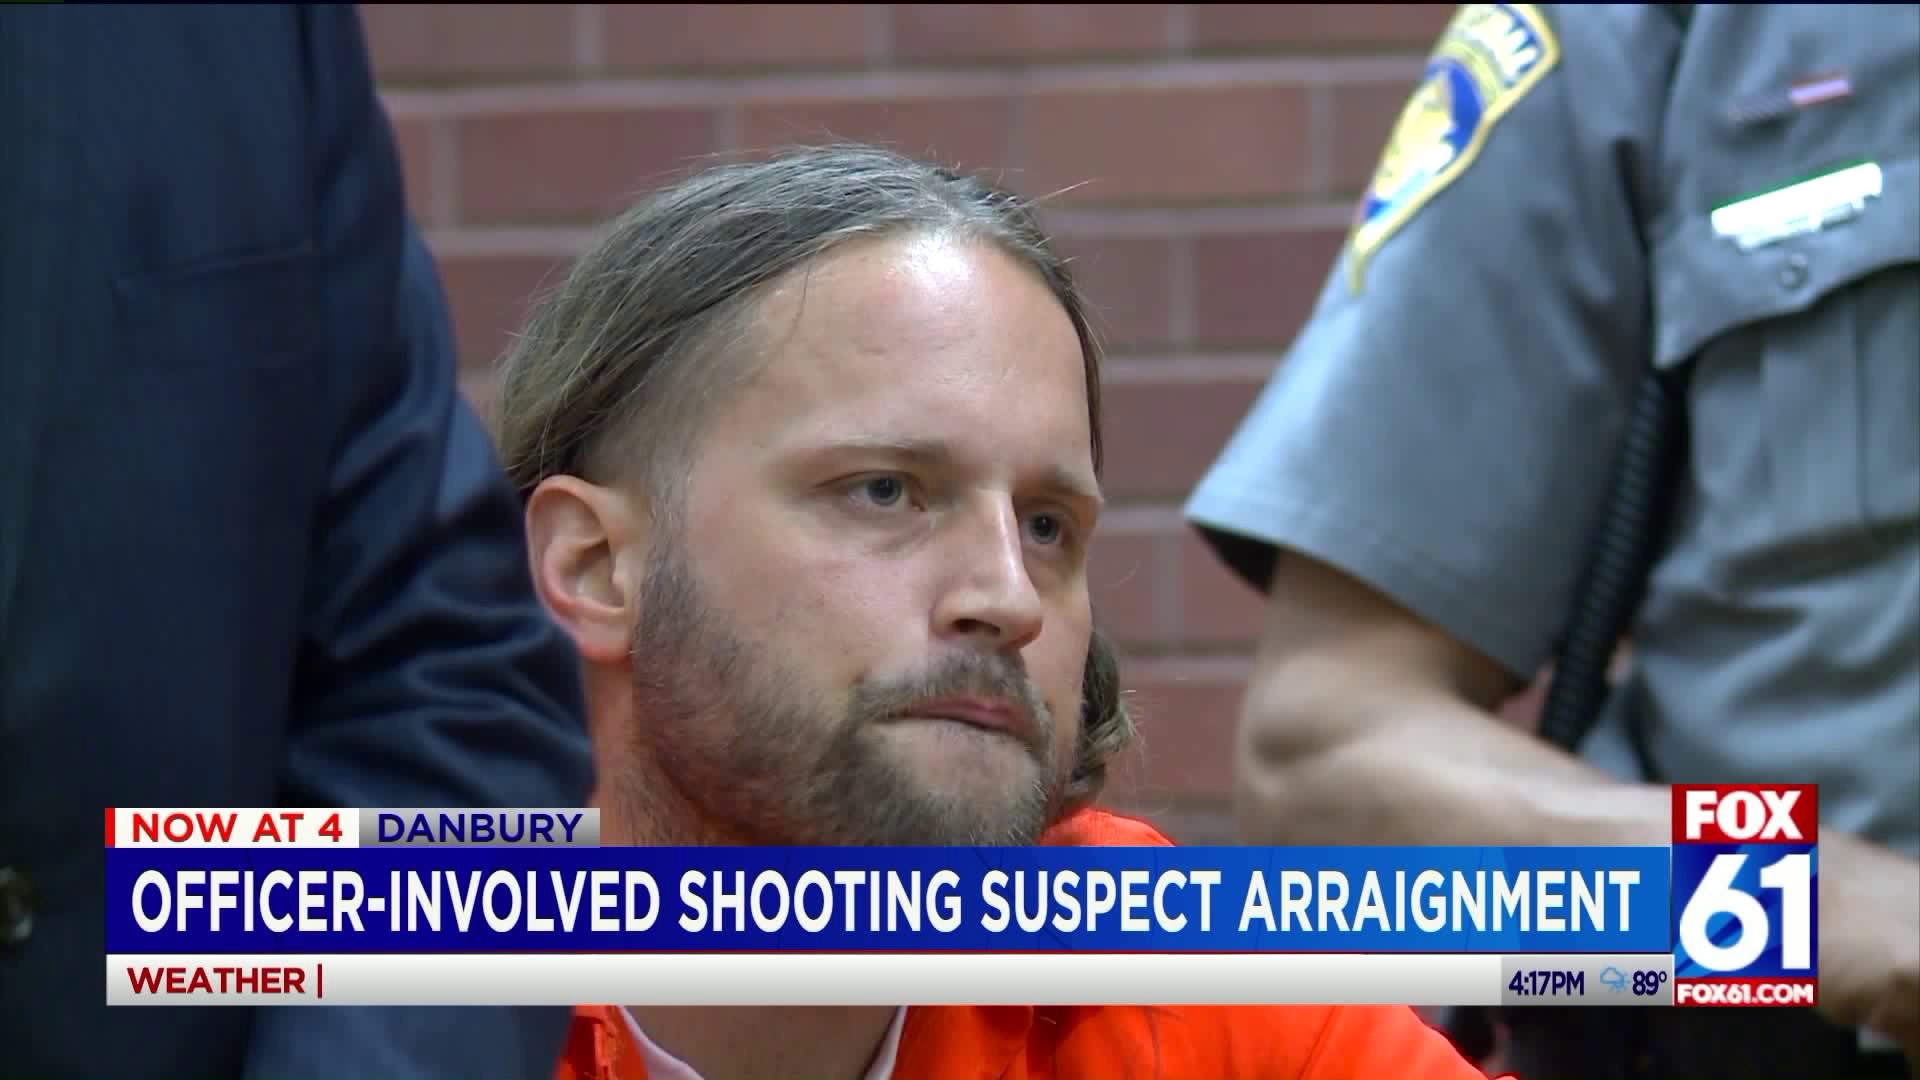 Officer-involved shooting suspect in Danbury in court